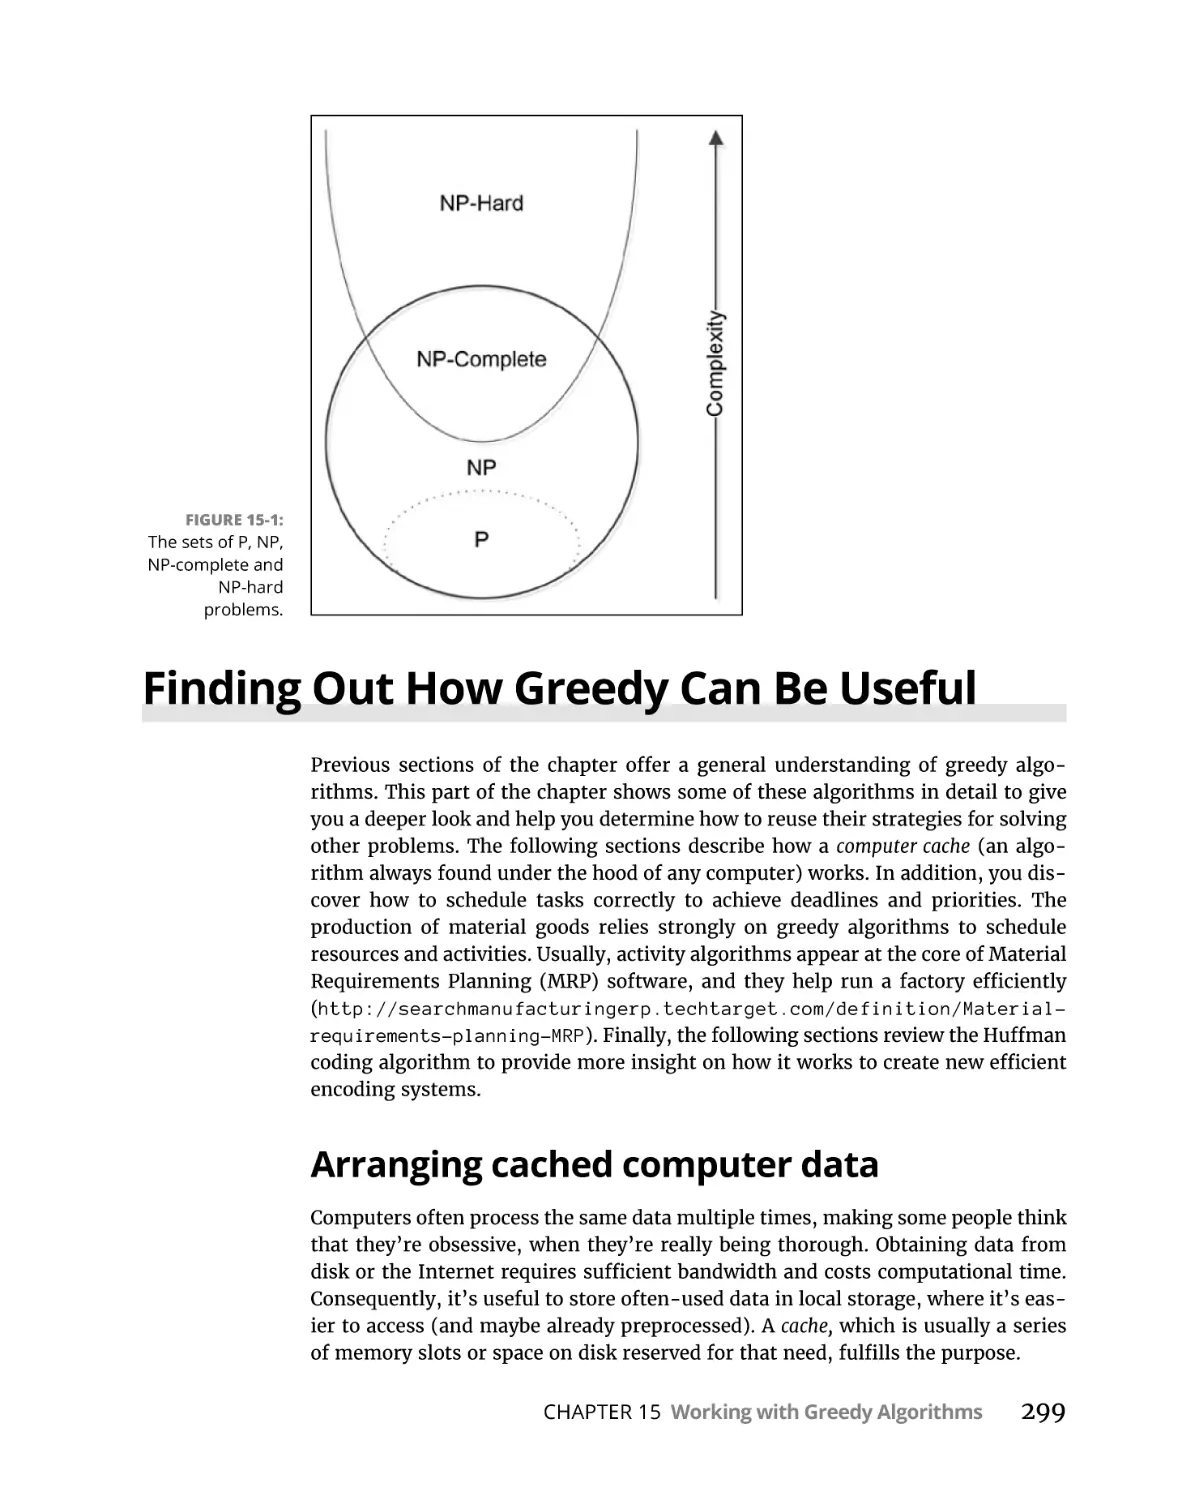 Finding Out How Greedy Can Be Useful
Arranging cached computer data